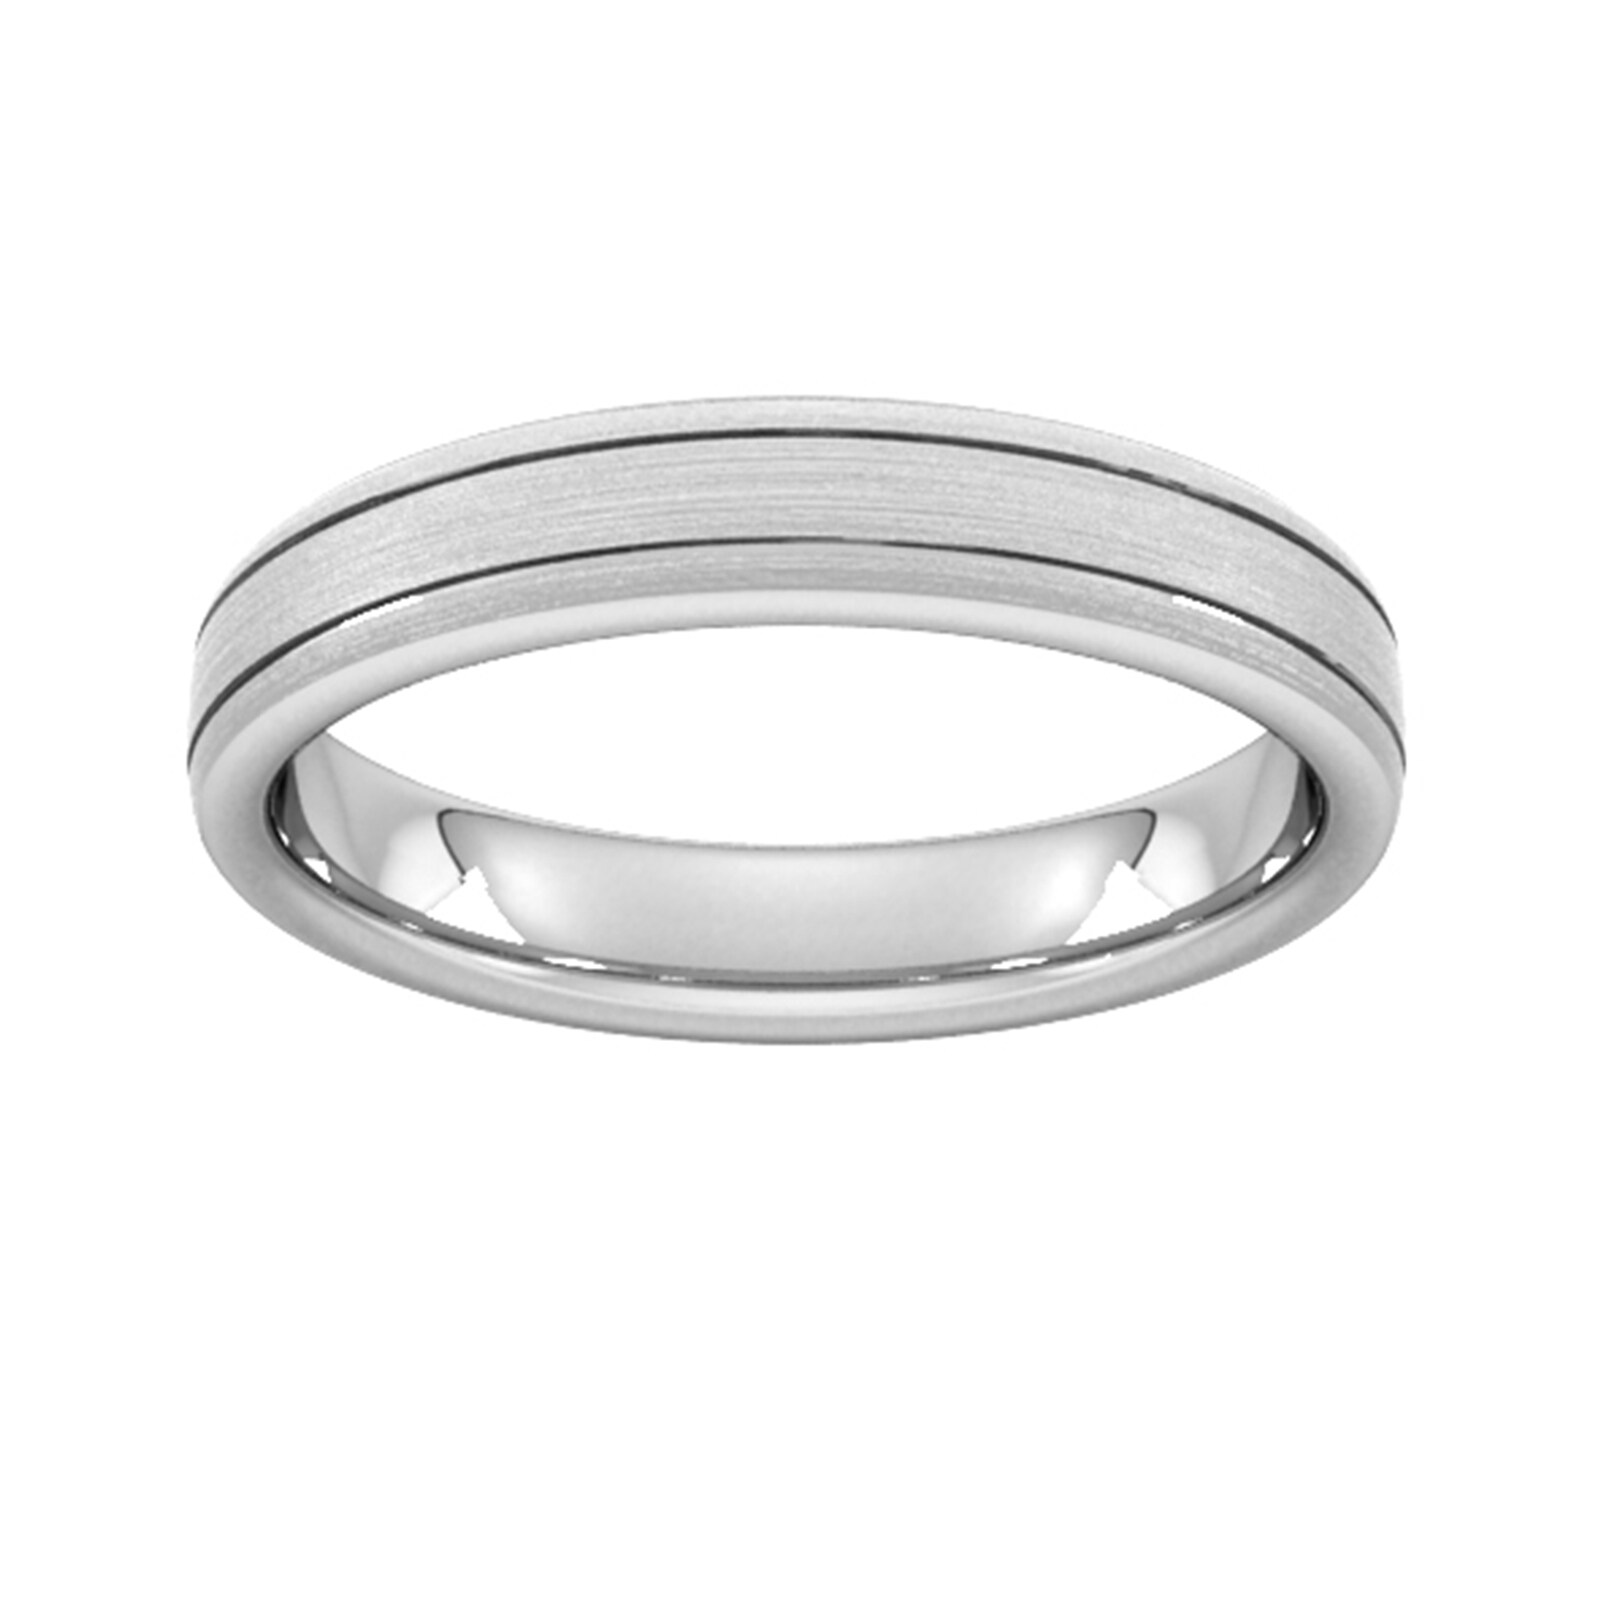 4mm D Shape Standard Matt Finish With Double Grooves Wedding Ring In 9 Carat White Gold - Ring Size Q